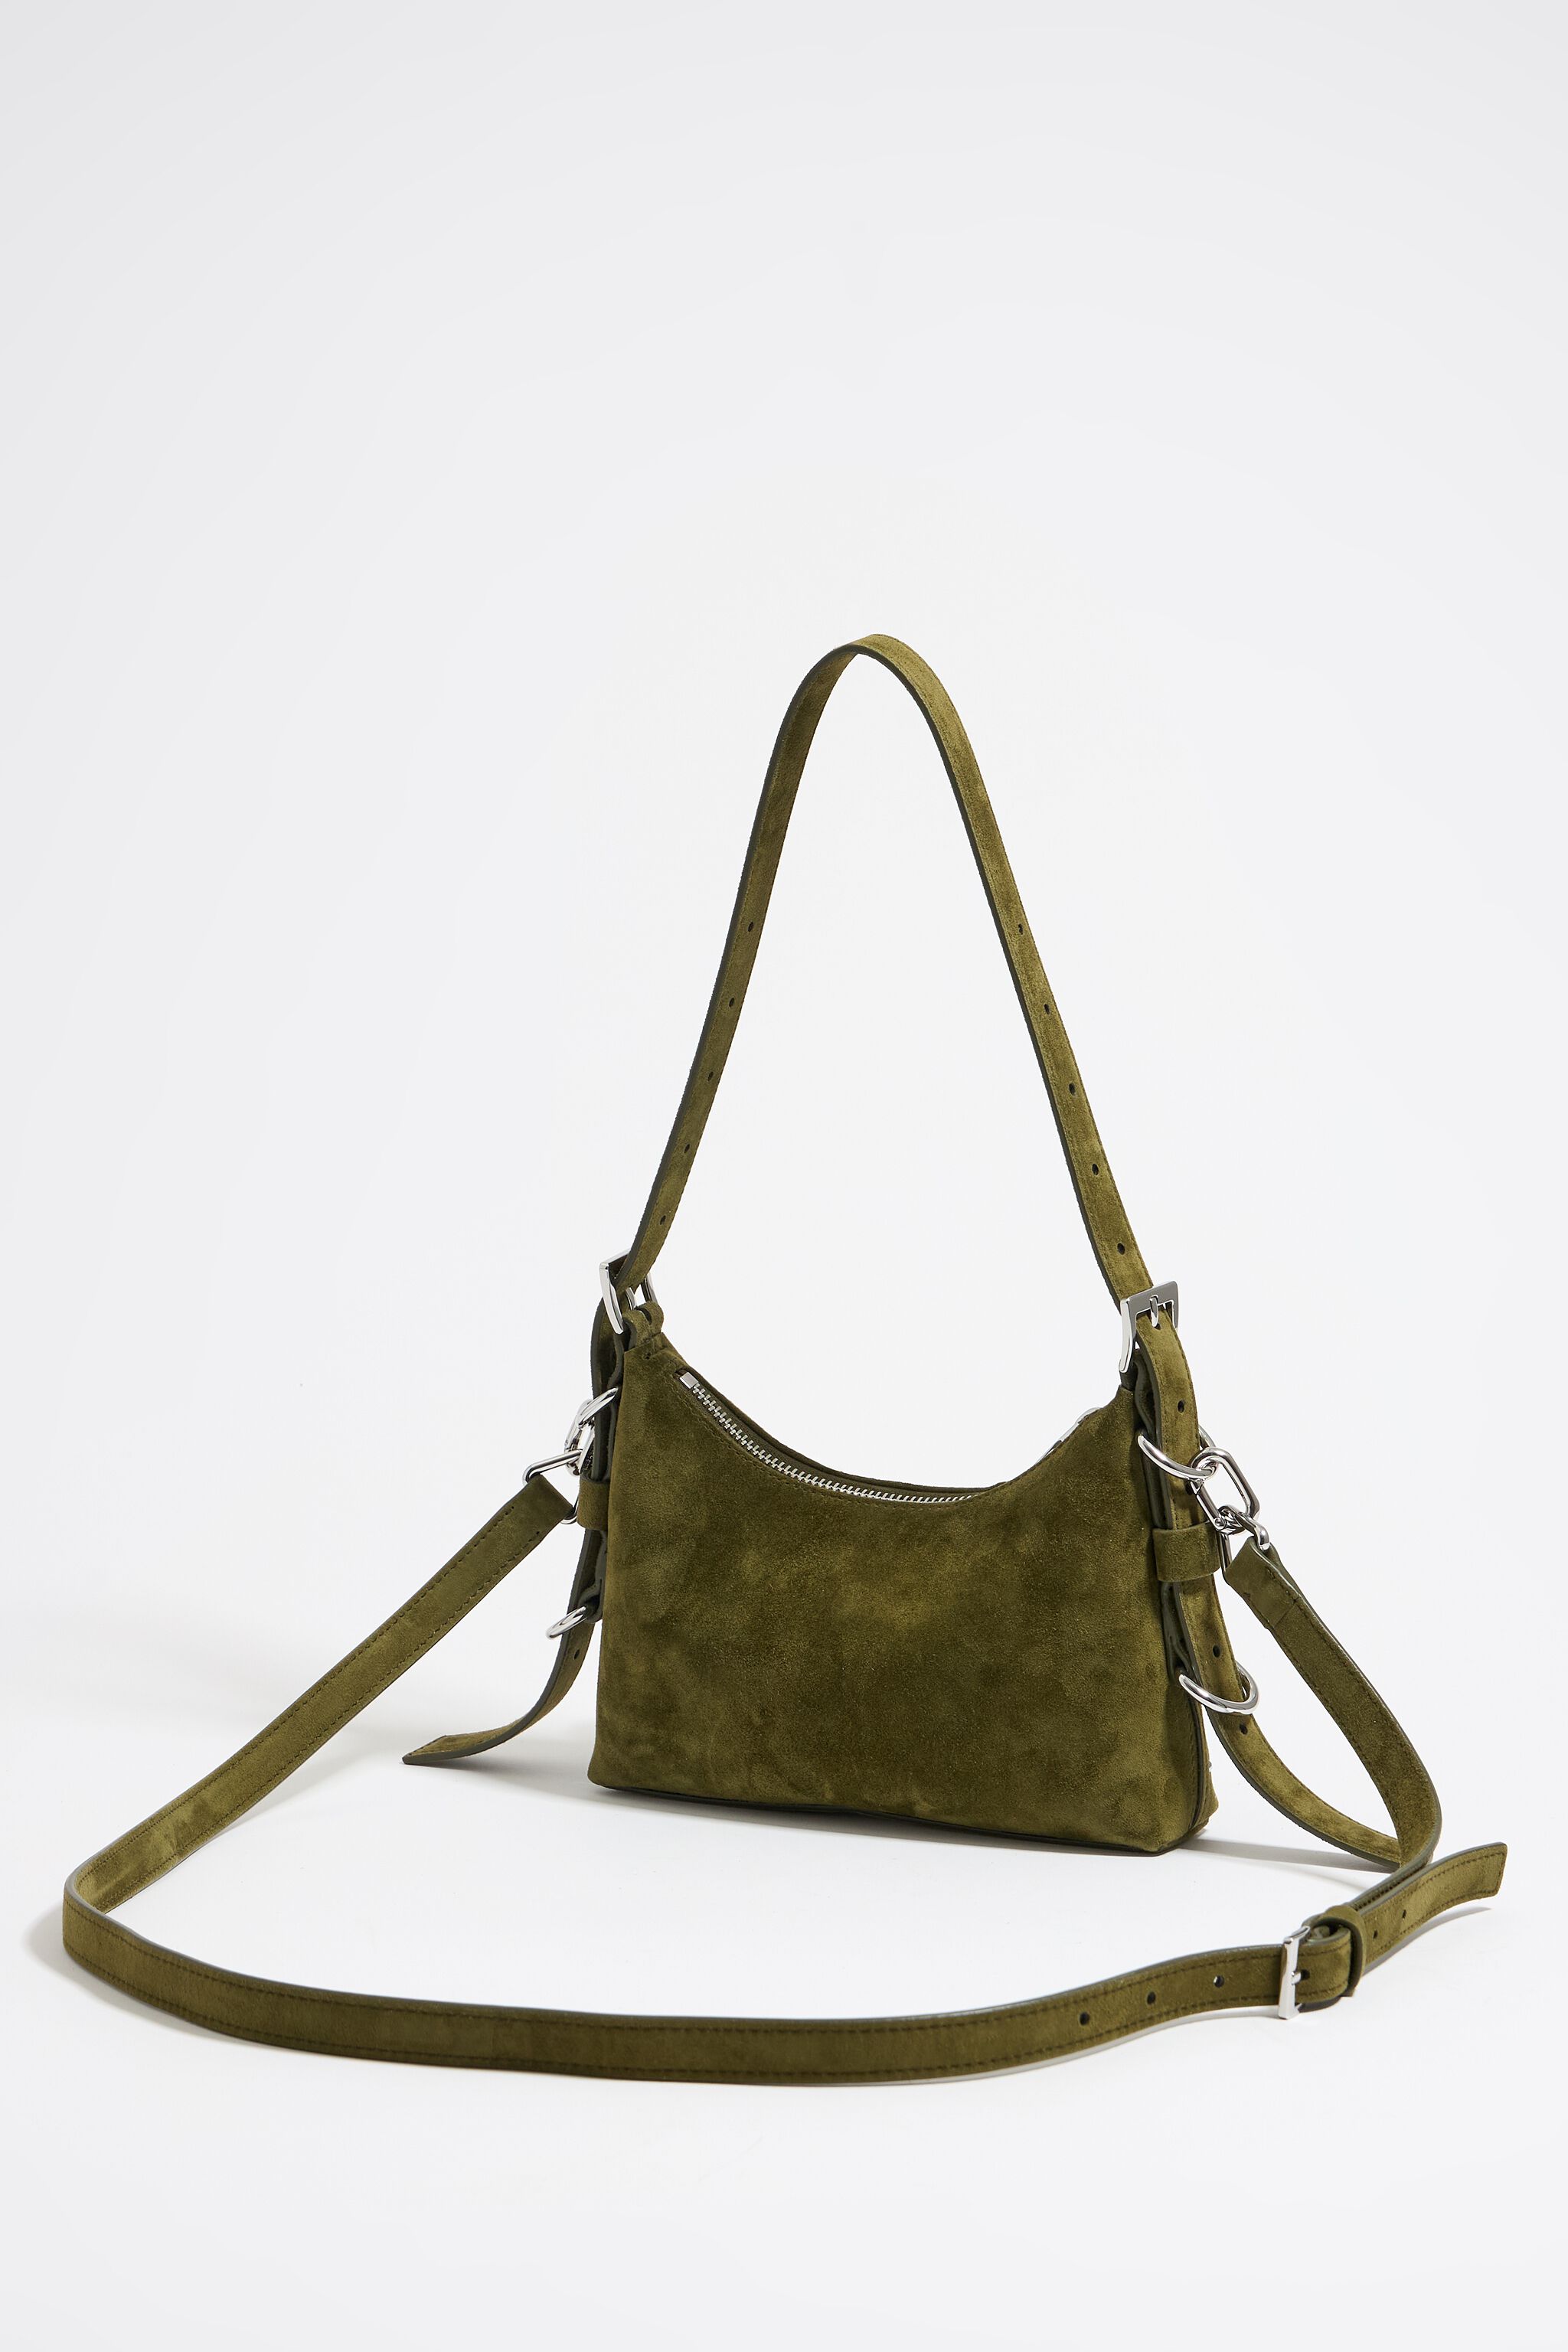 XS olive green leather Pocket slouch bag